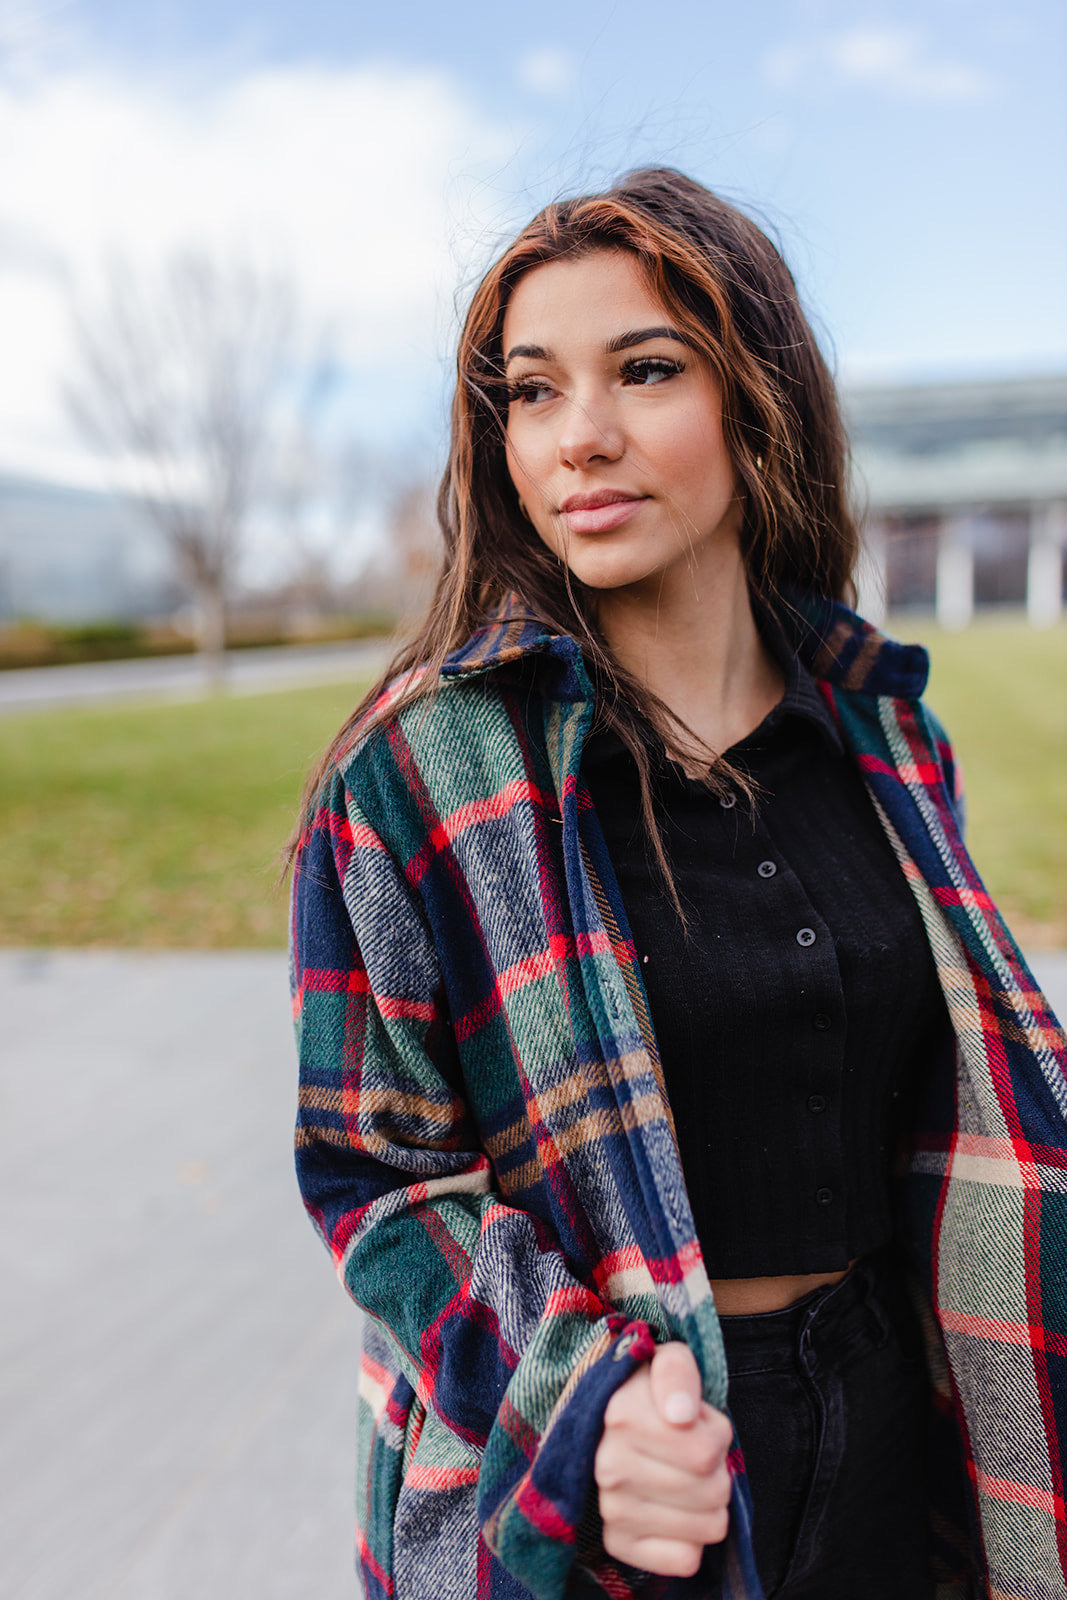 Vagabond Plaid Jacket RESTOCKED*** AVAILABLE IN SIZES SMALL-3X!!***